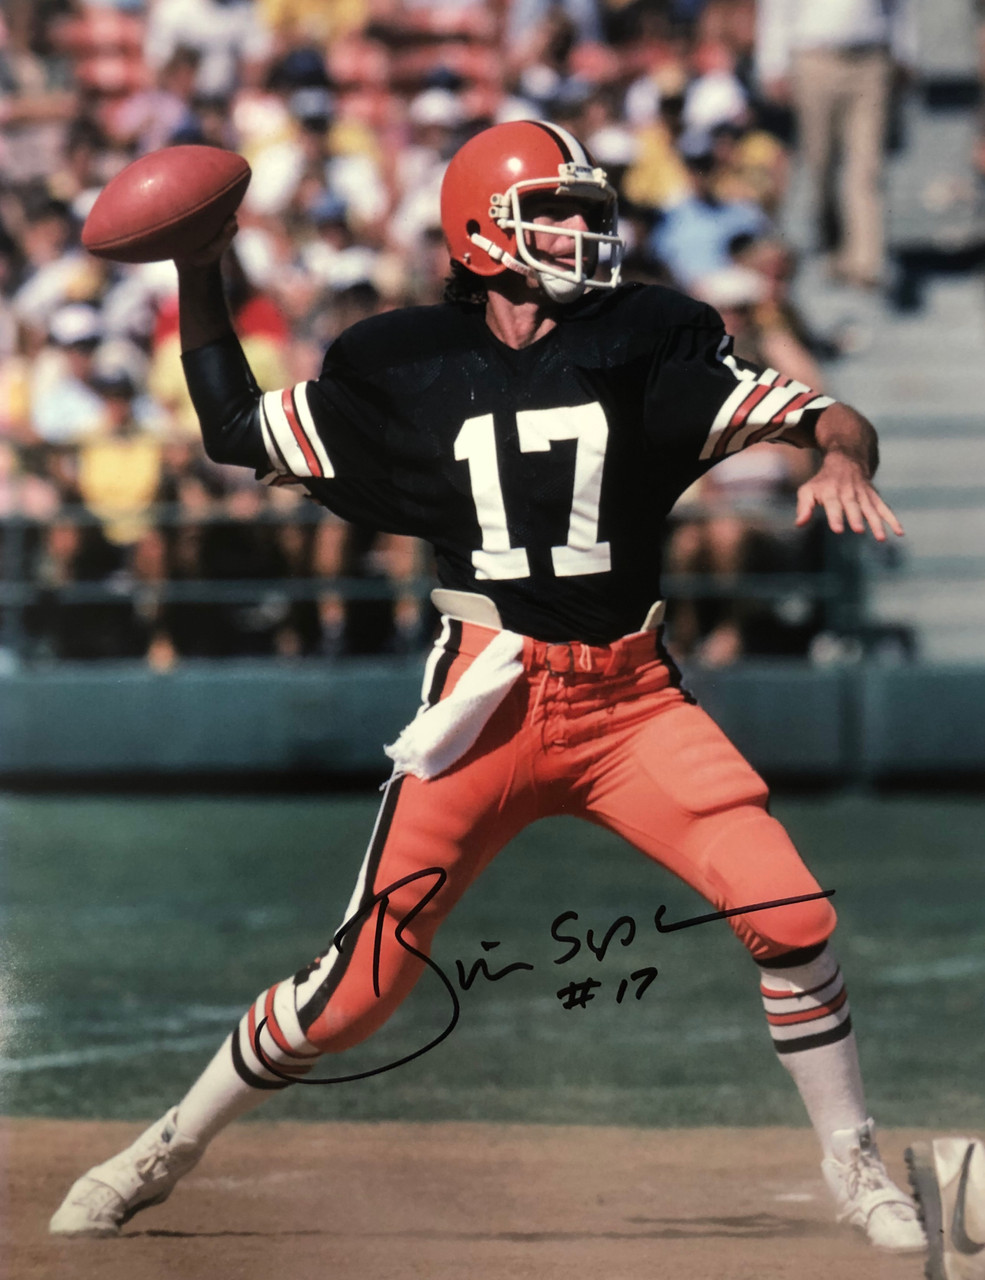 brian sipe jersey cleveland browns